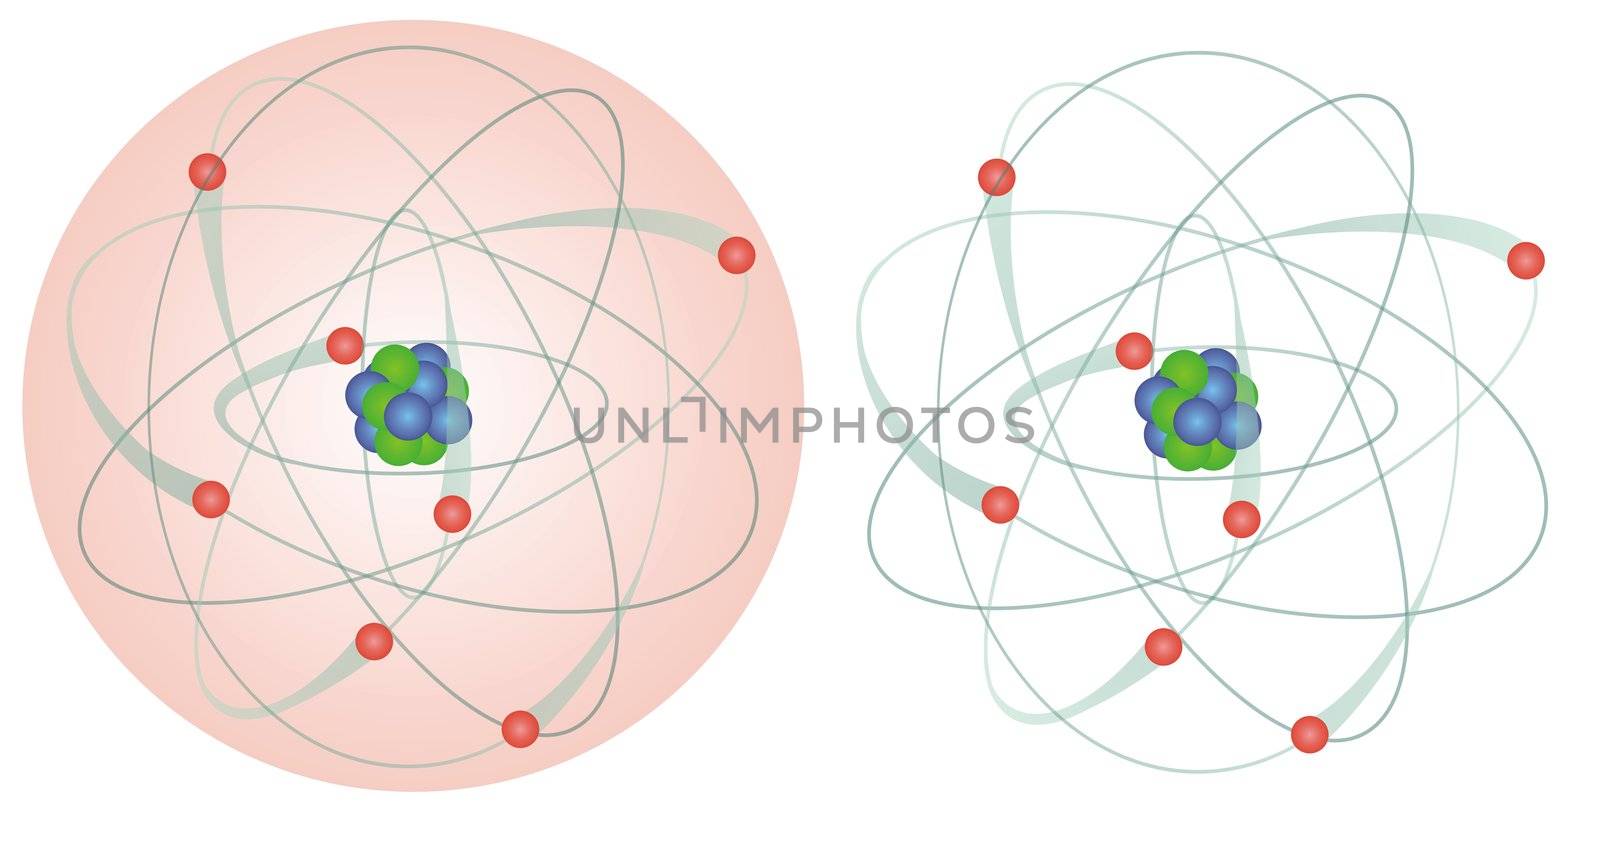 Model of an atom with electrons, neutrons and protons, illustration